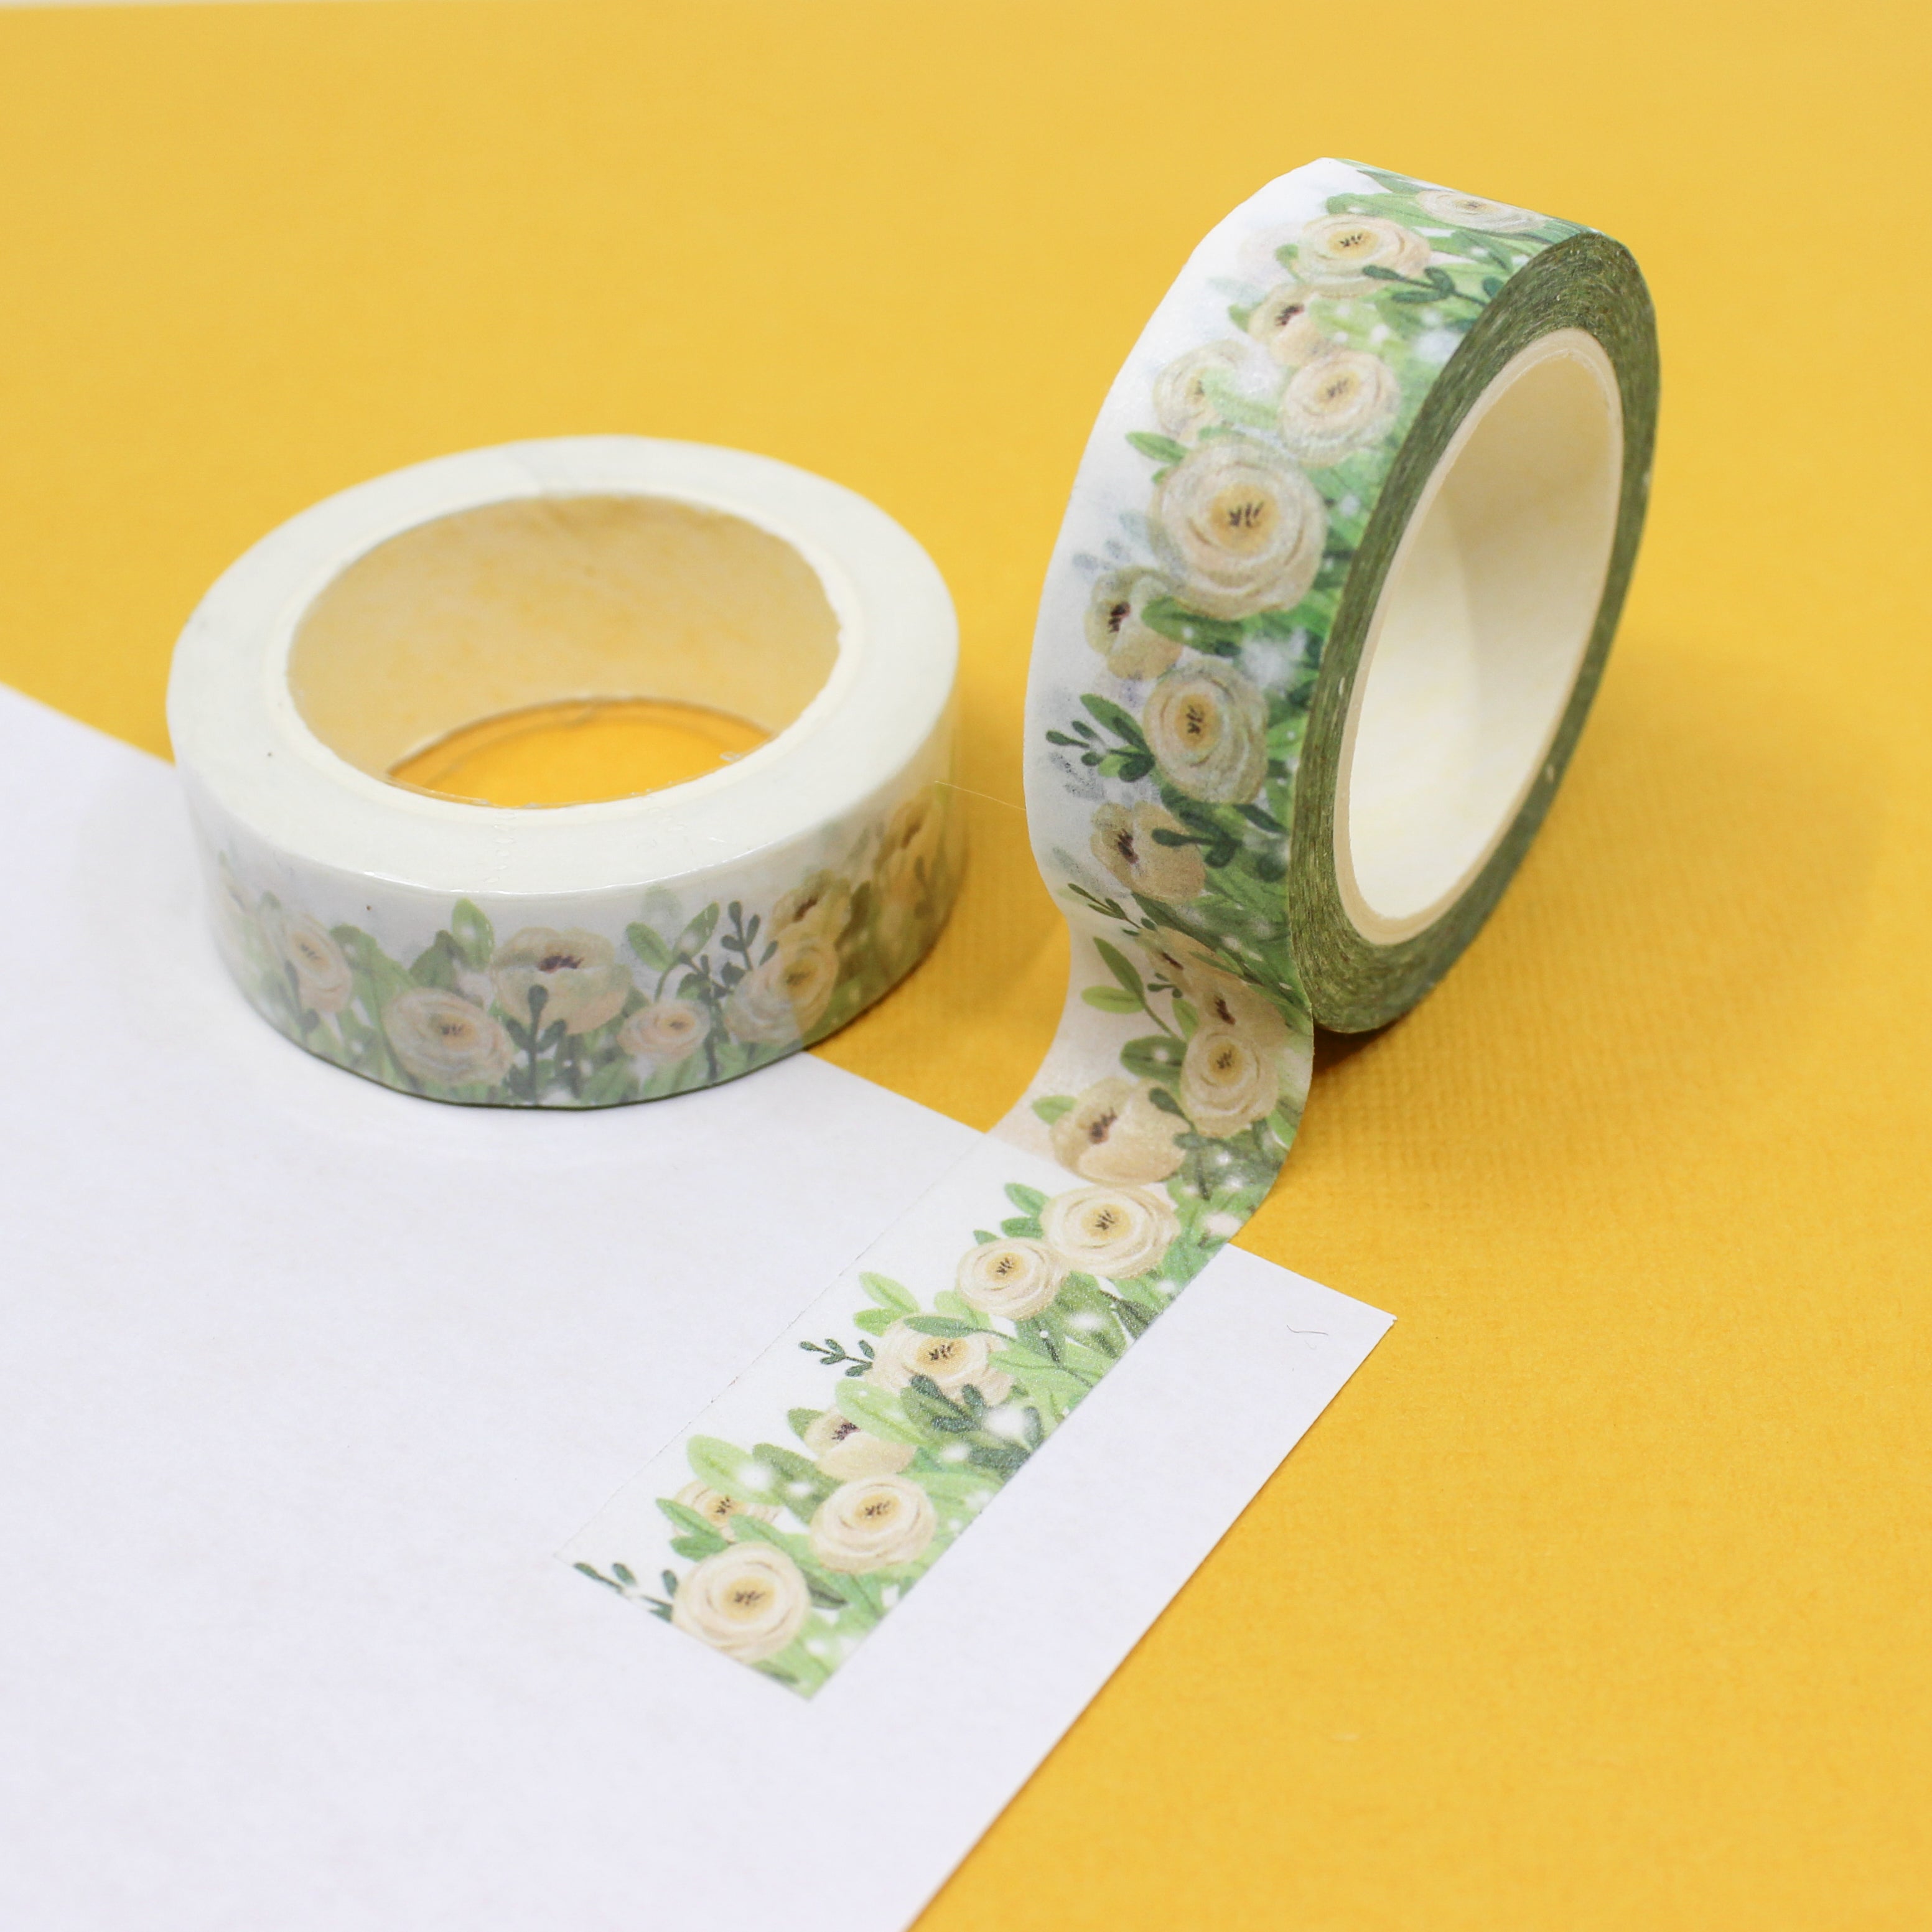 This is a pretty white roses flower collections pattern washi tape from BBB Supplies Craft Shop